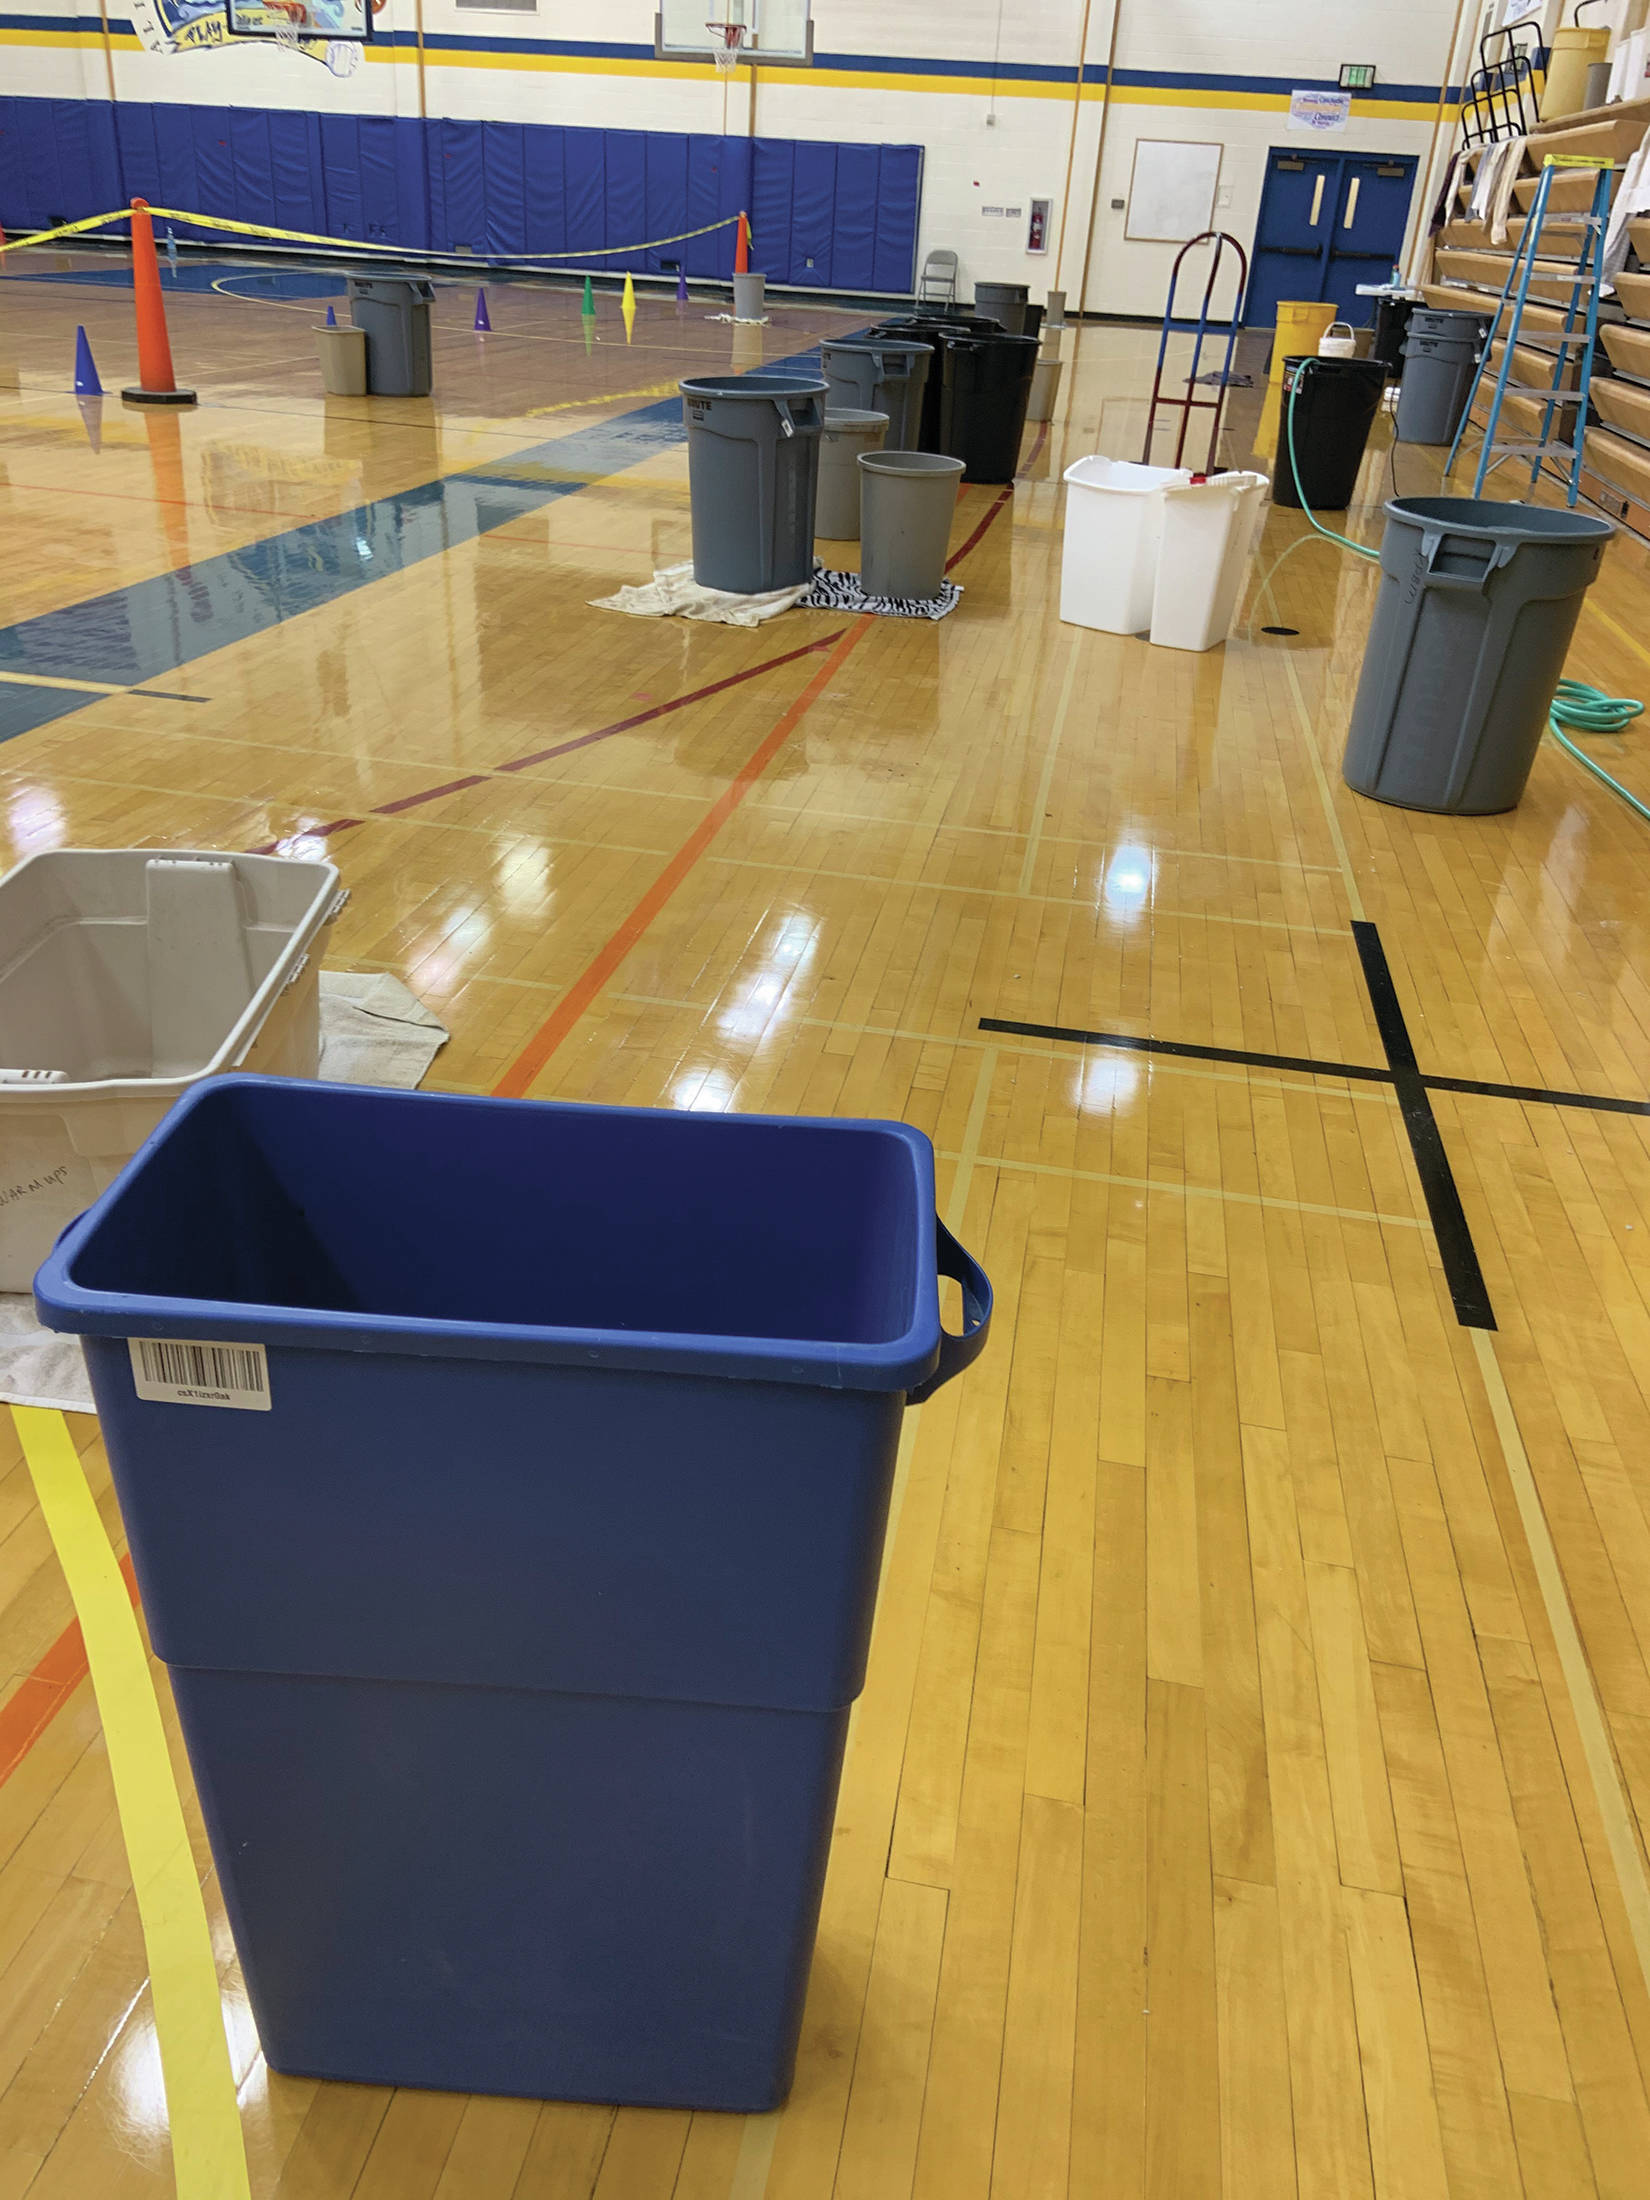 Buckets fill the Homer High School gymnasium, catching water leaking through a portion of the roof at the school in Homer, Alaska. (Photo courtesy Doug Waclawski)